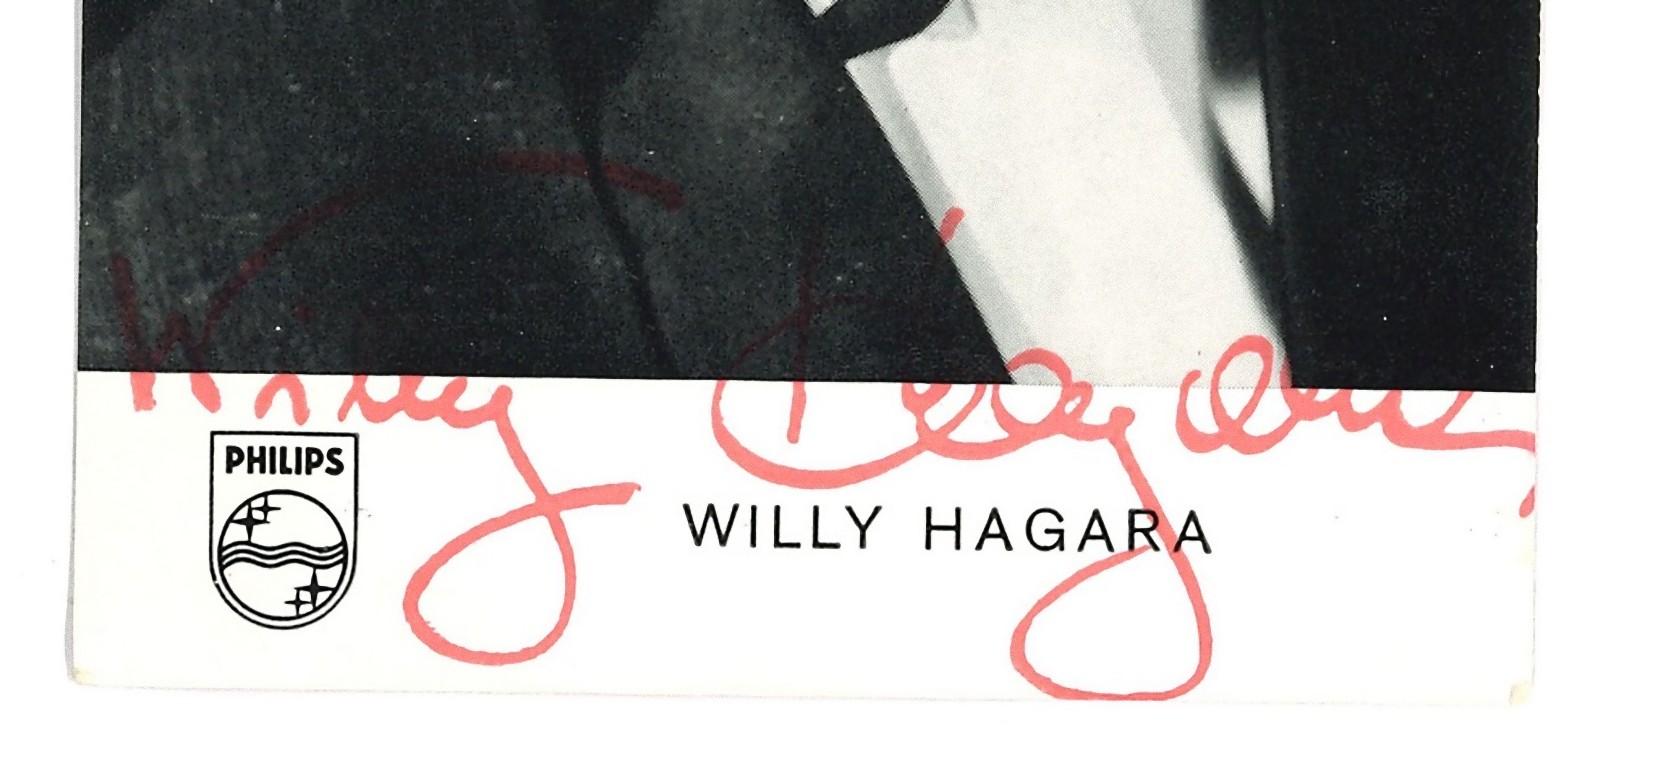 Autographed Portrait of Willy Hagara  - Vintage b/w Postcard - 1960s - Photograph by Unknown